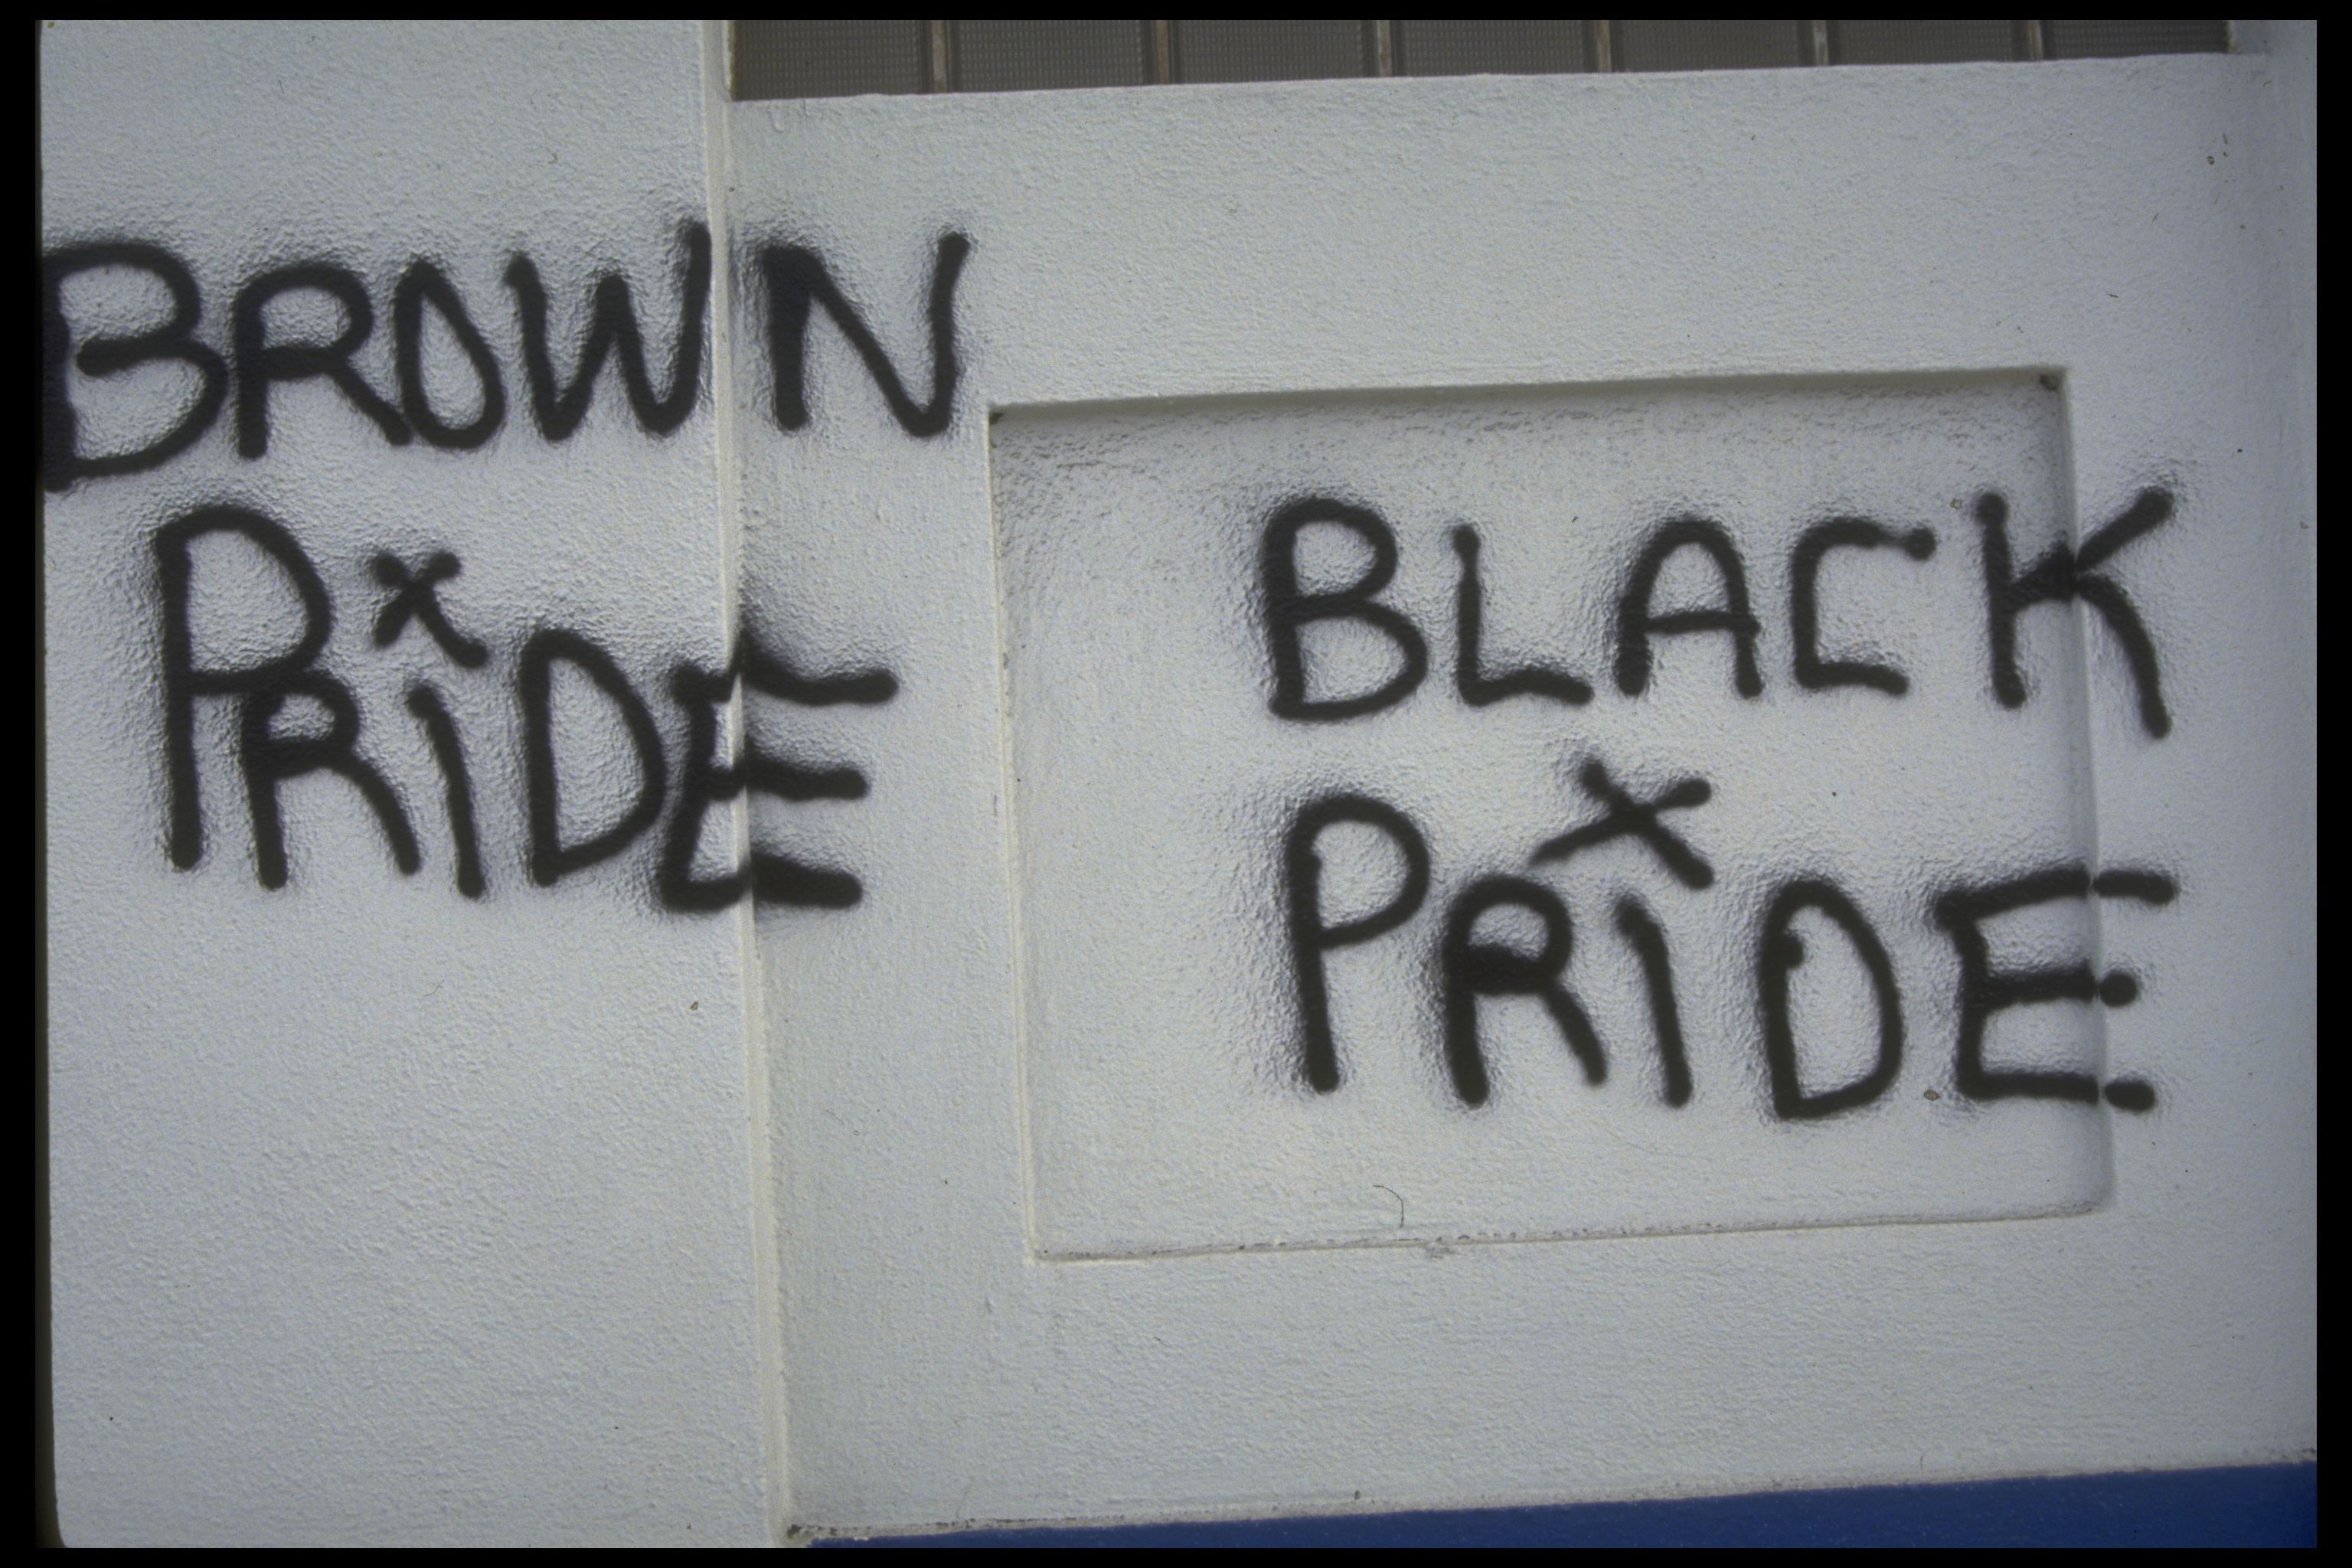 Graffiti on a wall in South Central Los Angeles reading "Brown Pride" and "Black Pride" after the rioting prompted by the not guilty verdict of police officers accused of beating Rodney King.